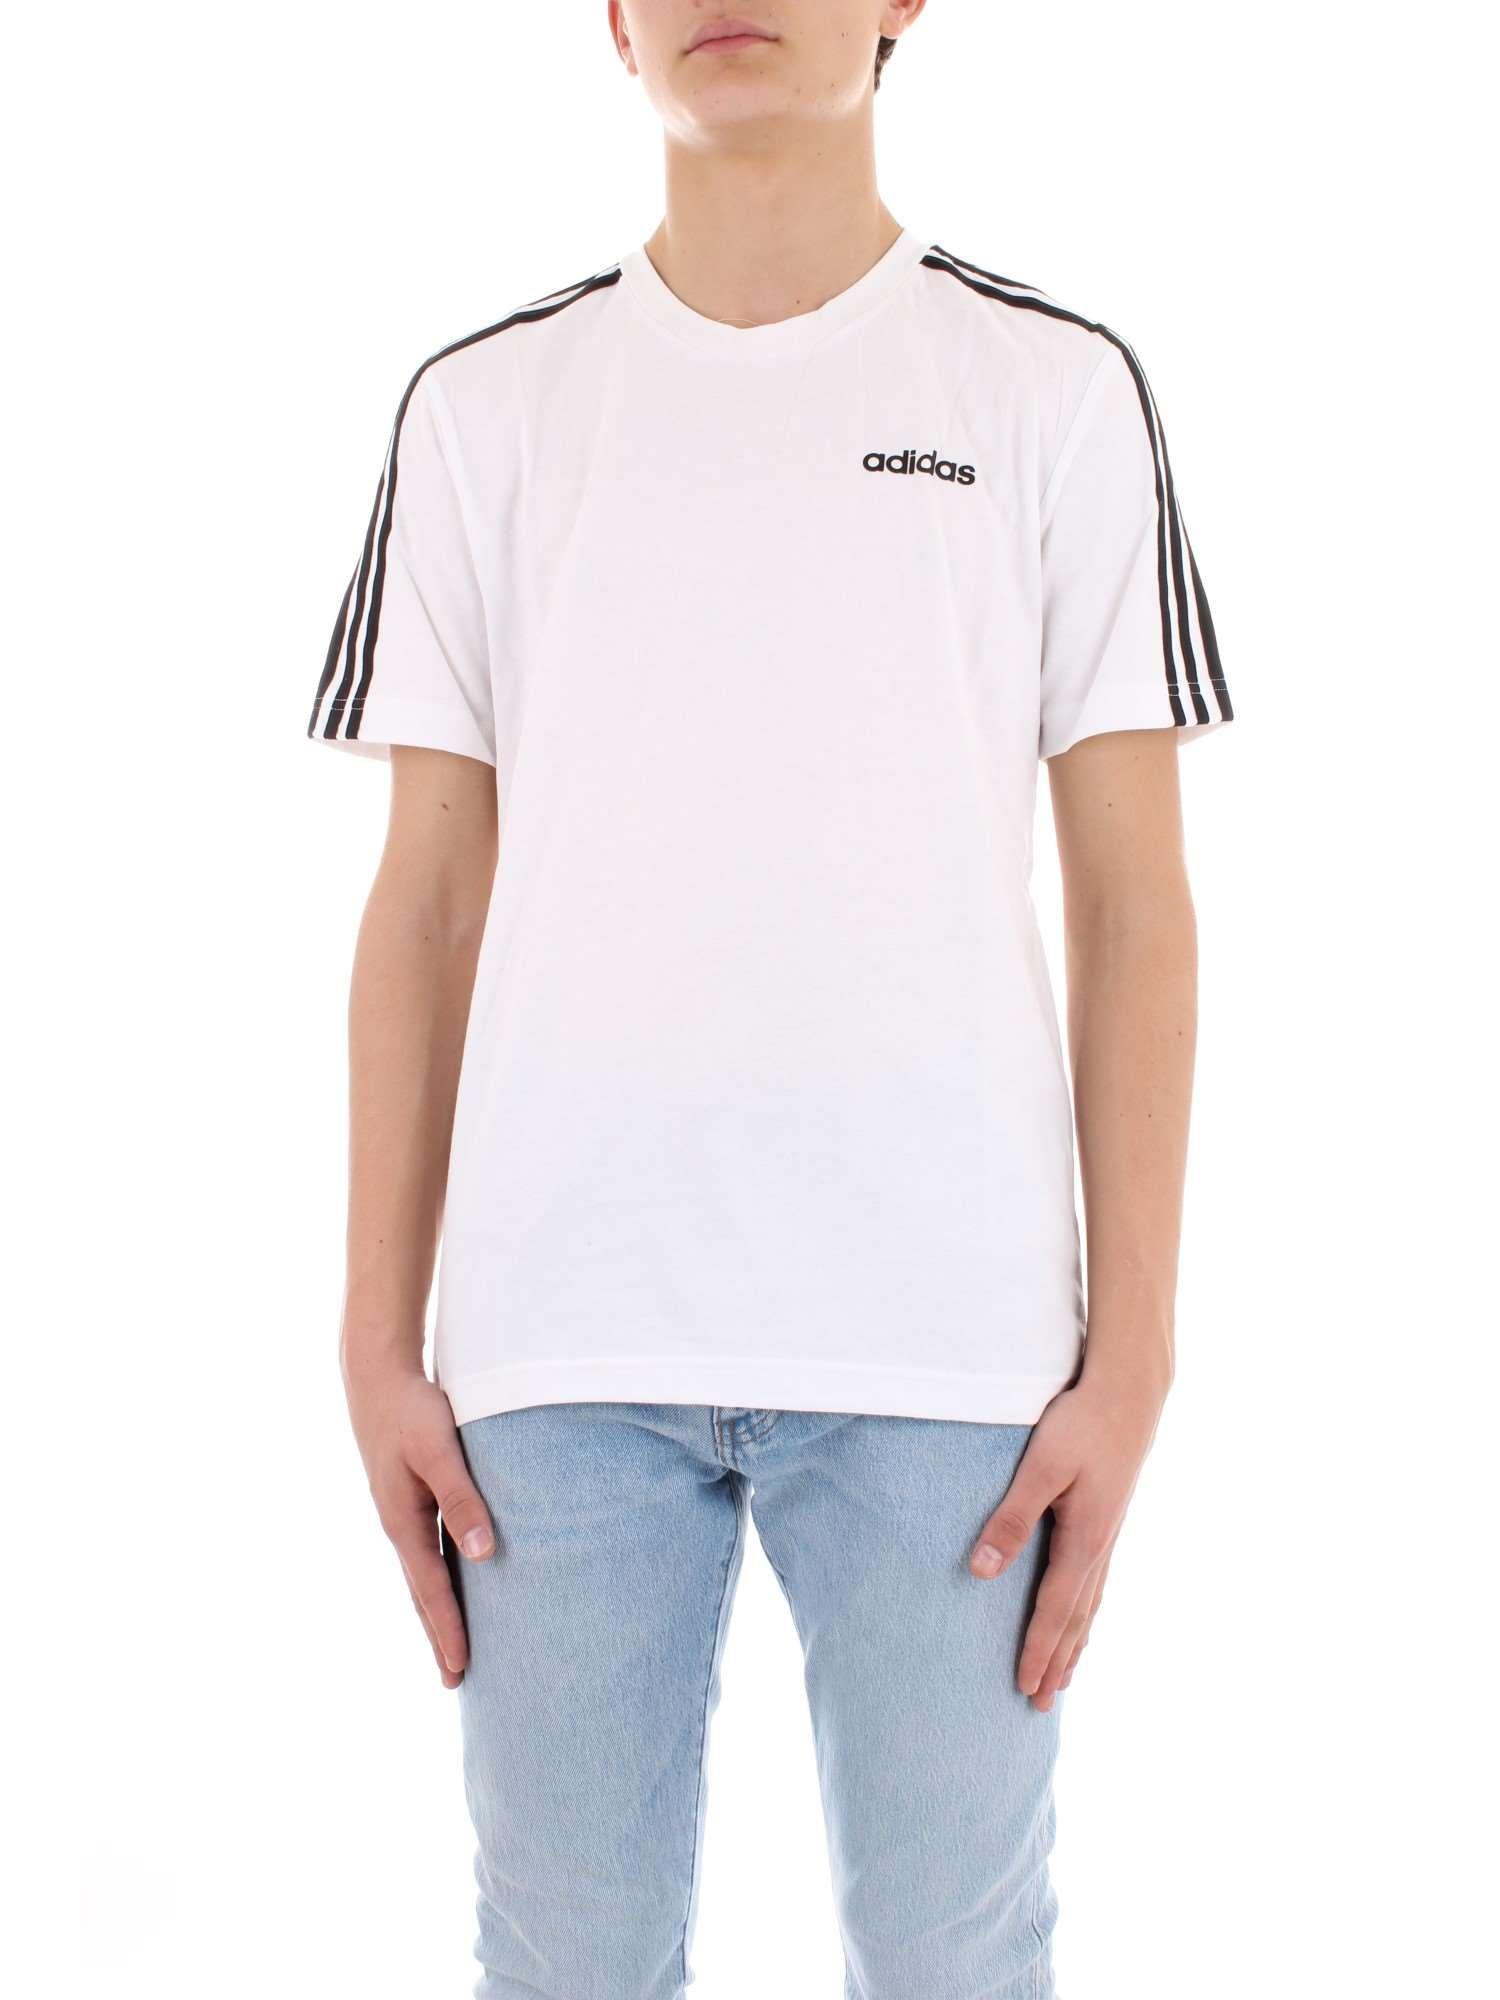 adidas White Cotton T-shirt in White for Men - Lyst